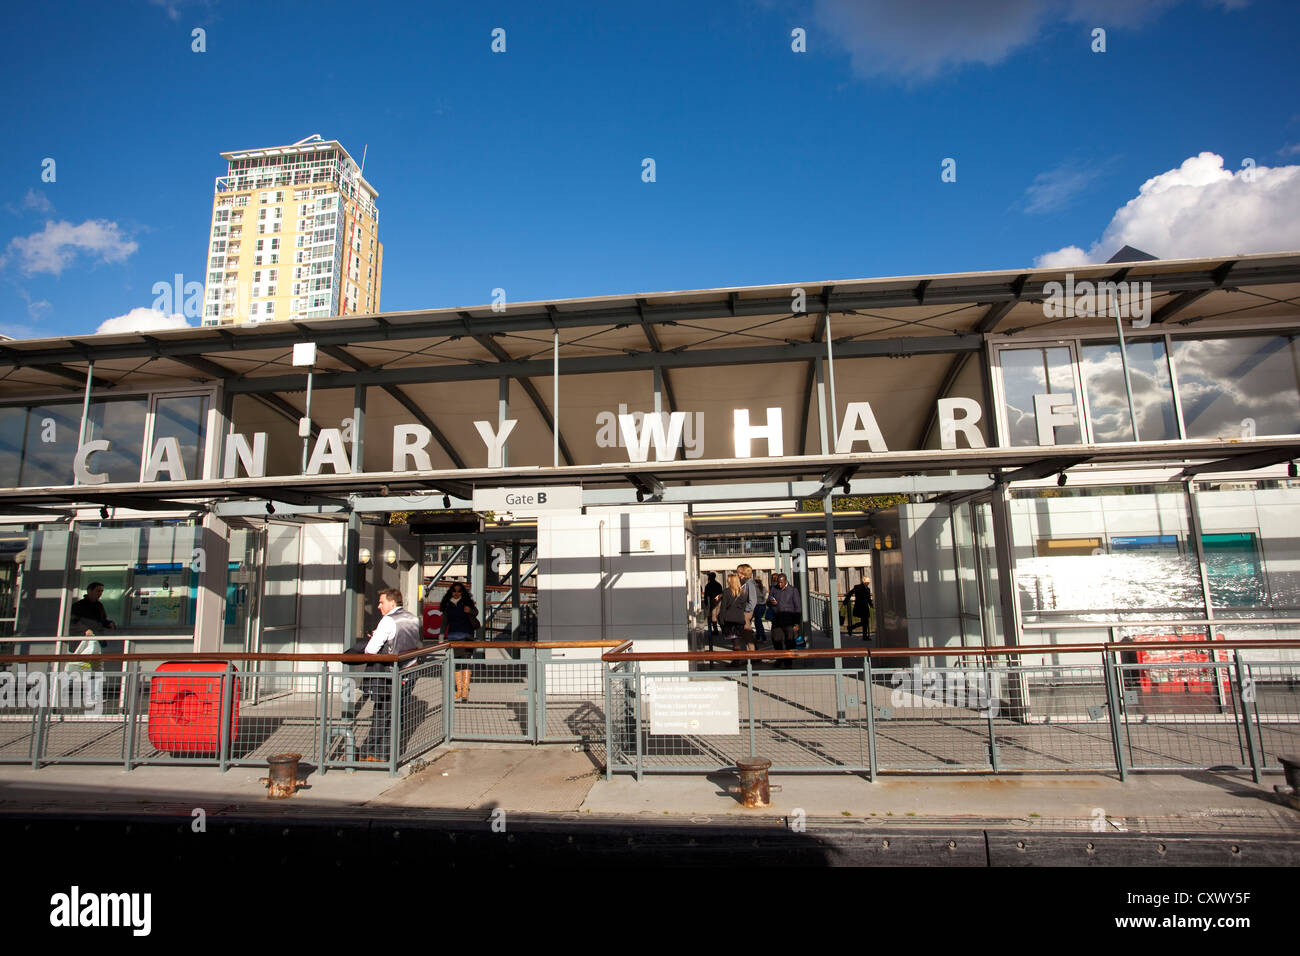 Canary Wharf Pier, London River Bus Services, Themse, Isle of Dogs, London, England, United Kingdom Stockfoto